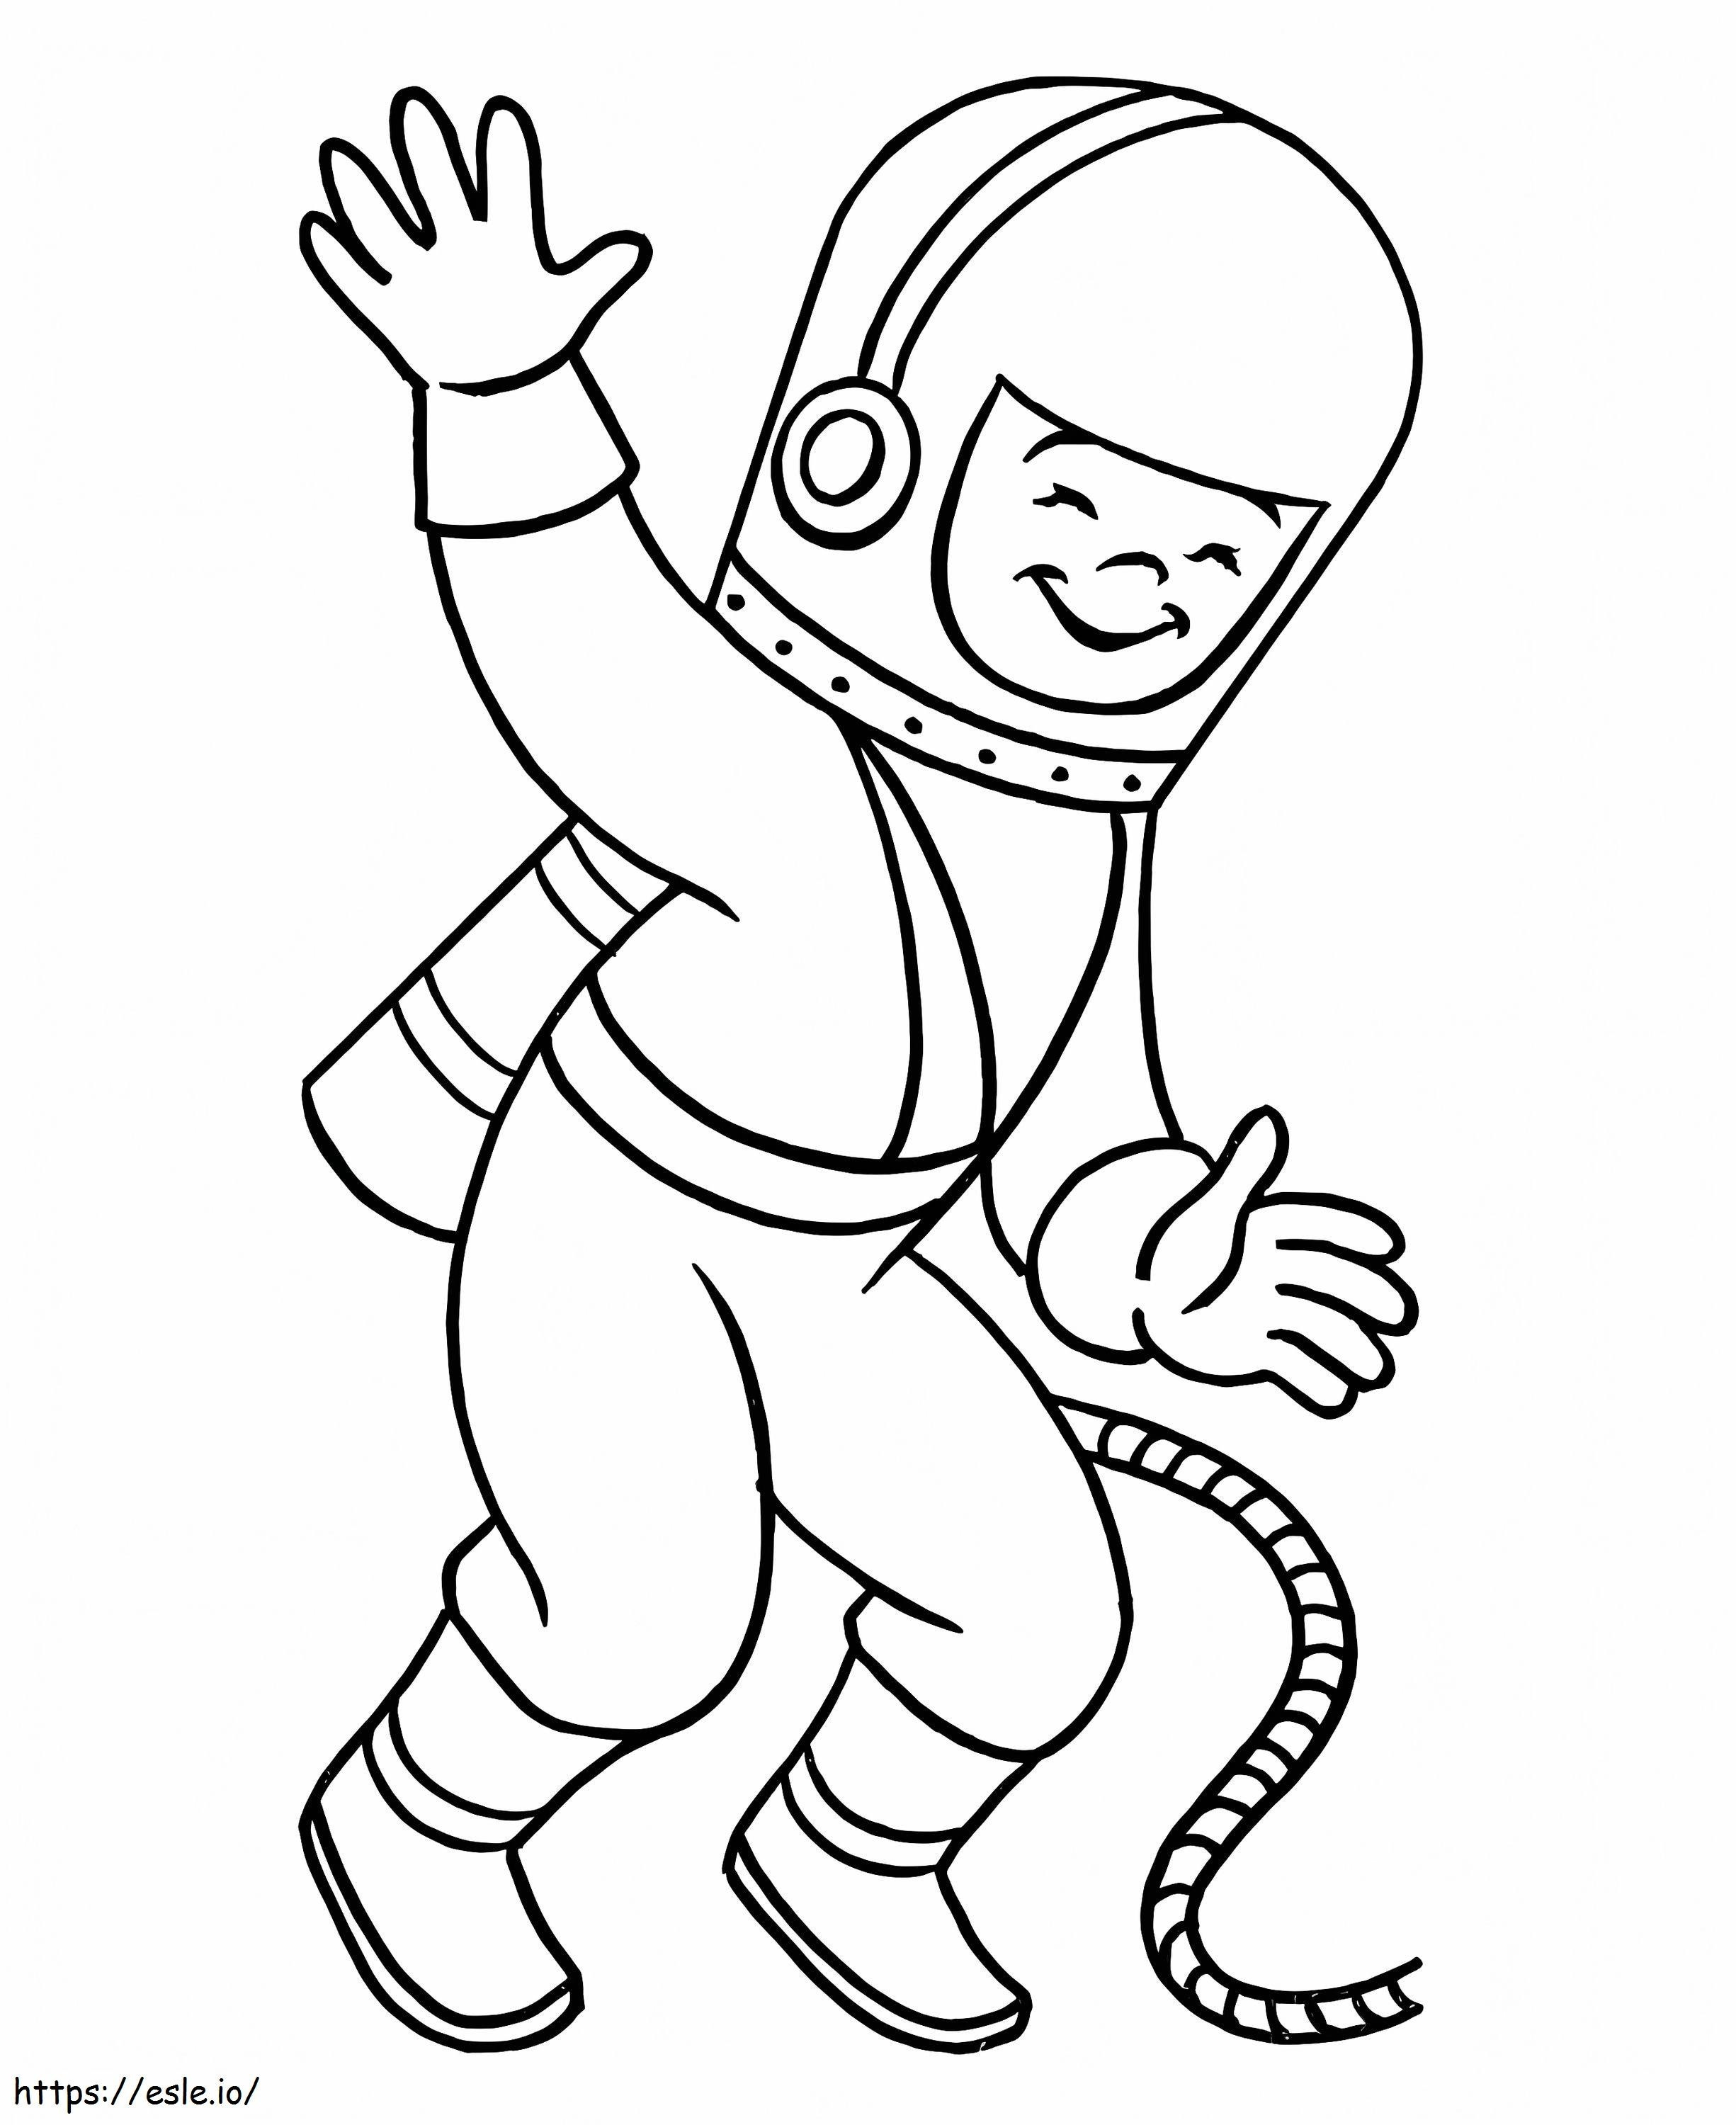 Wonderful Astronaut coloring page